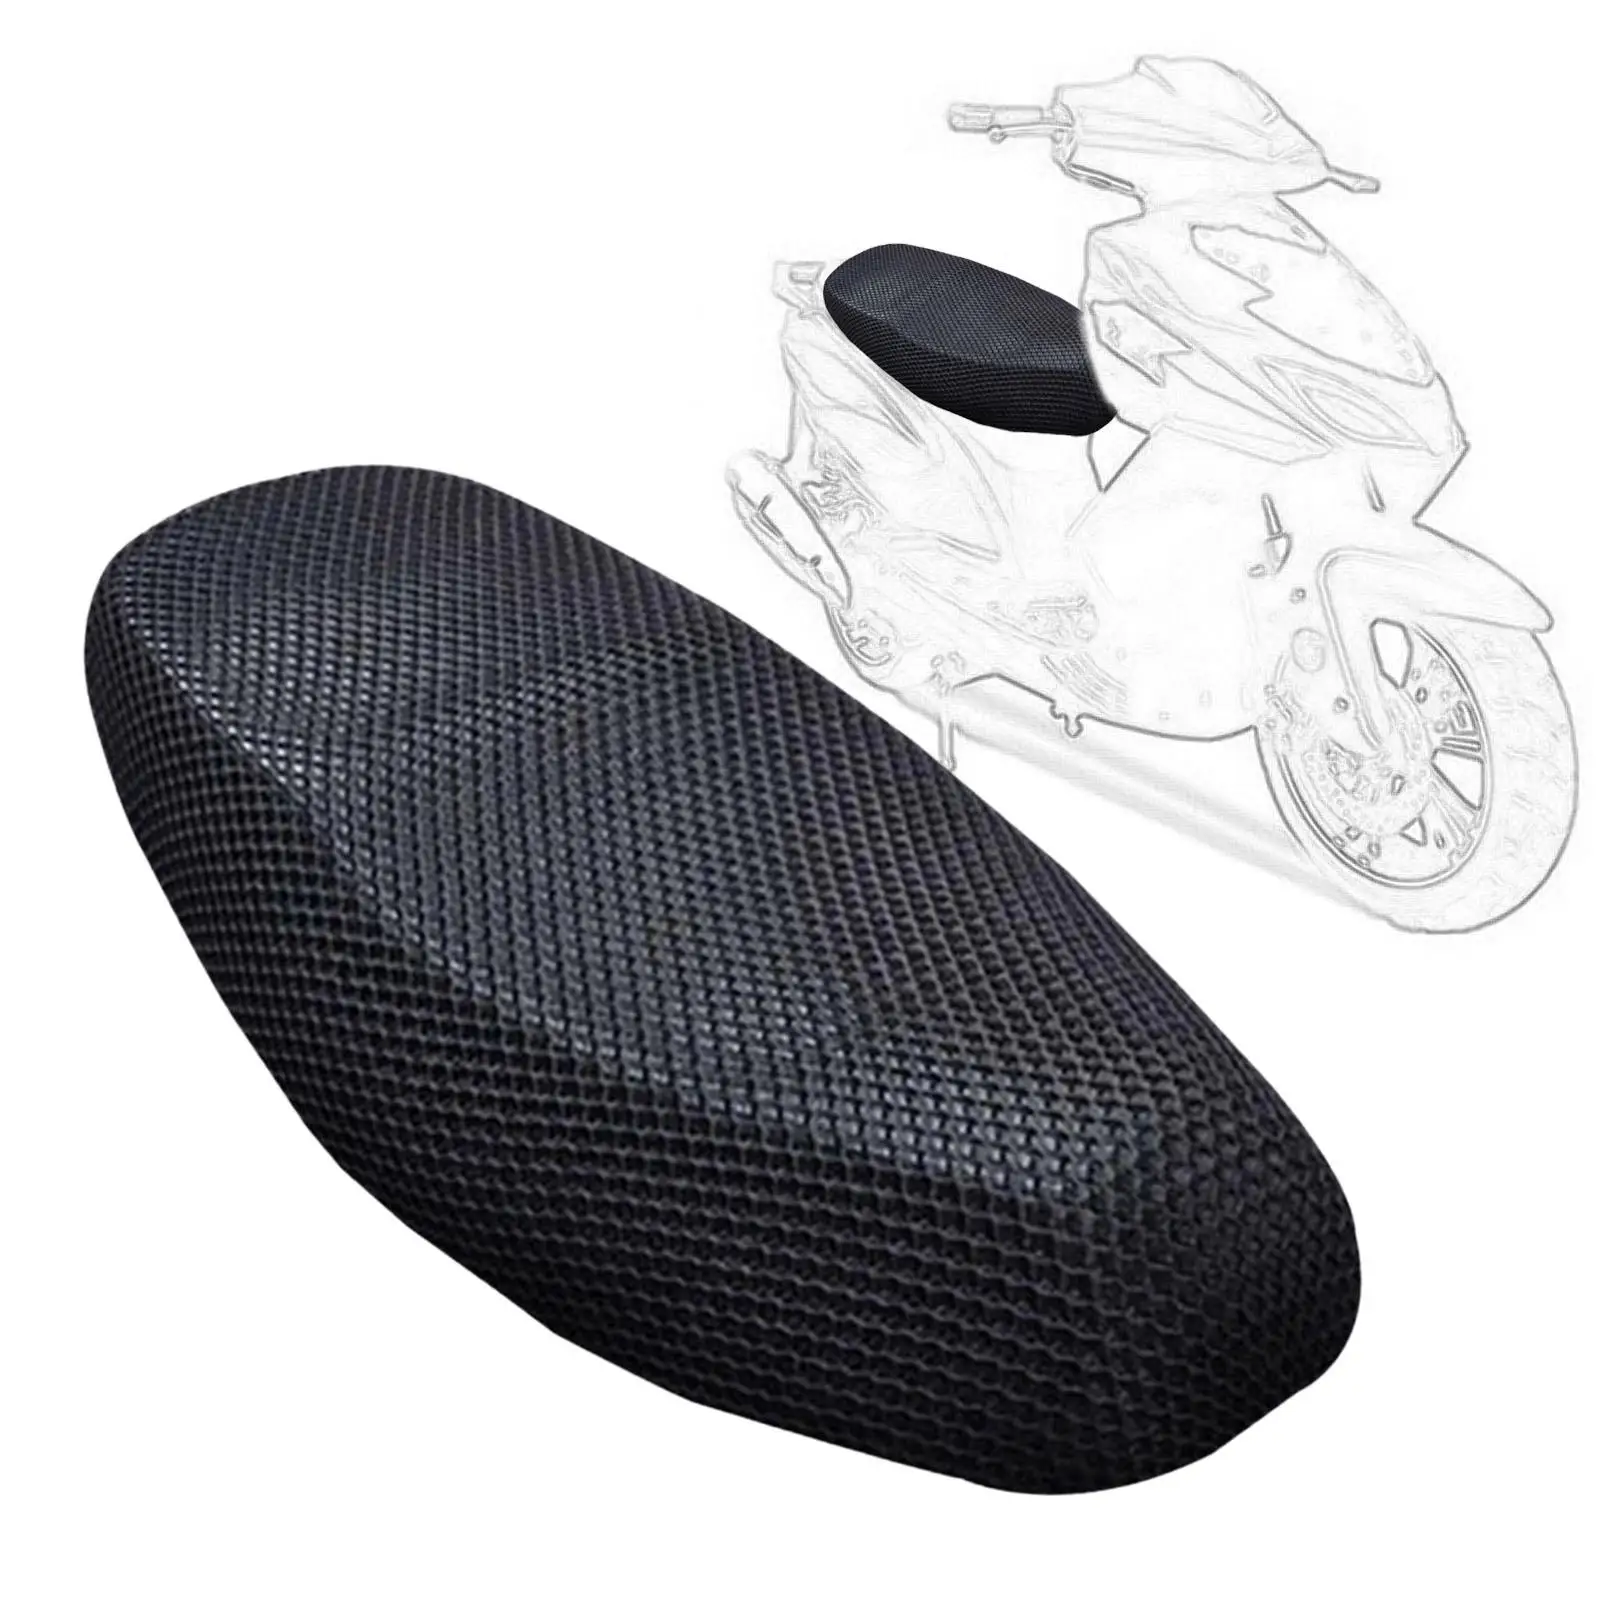 Motorcycle Seat Mesh Cover Anti Slip 3D Thicken Motorbike Seat Cushion Cover